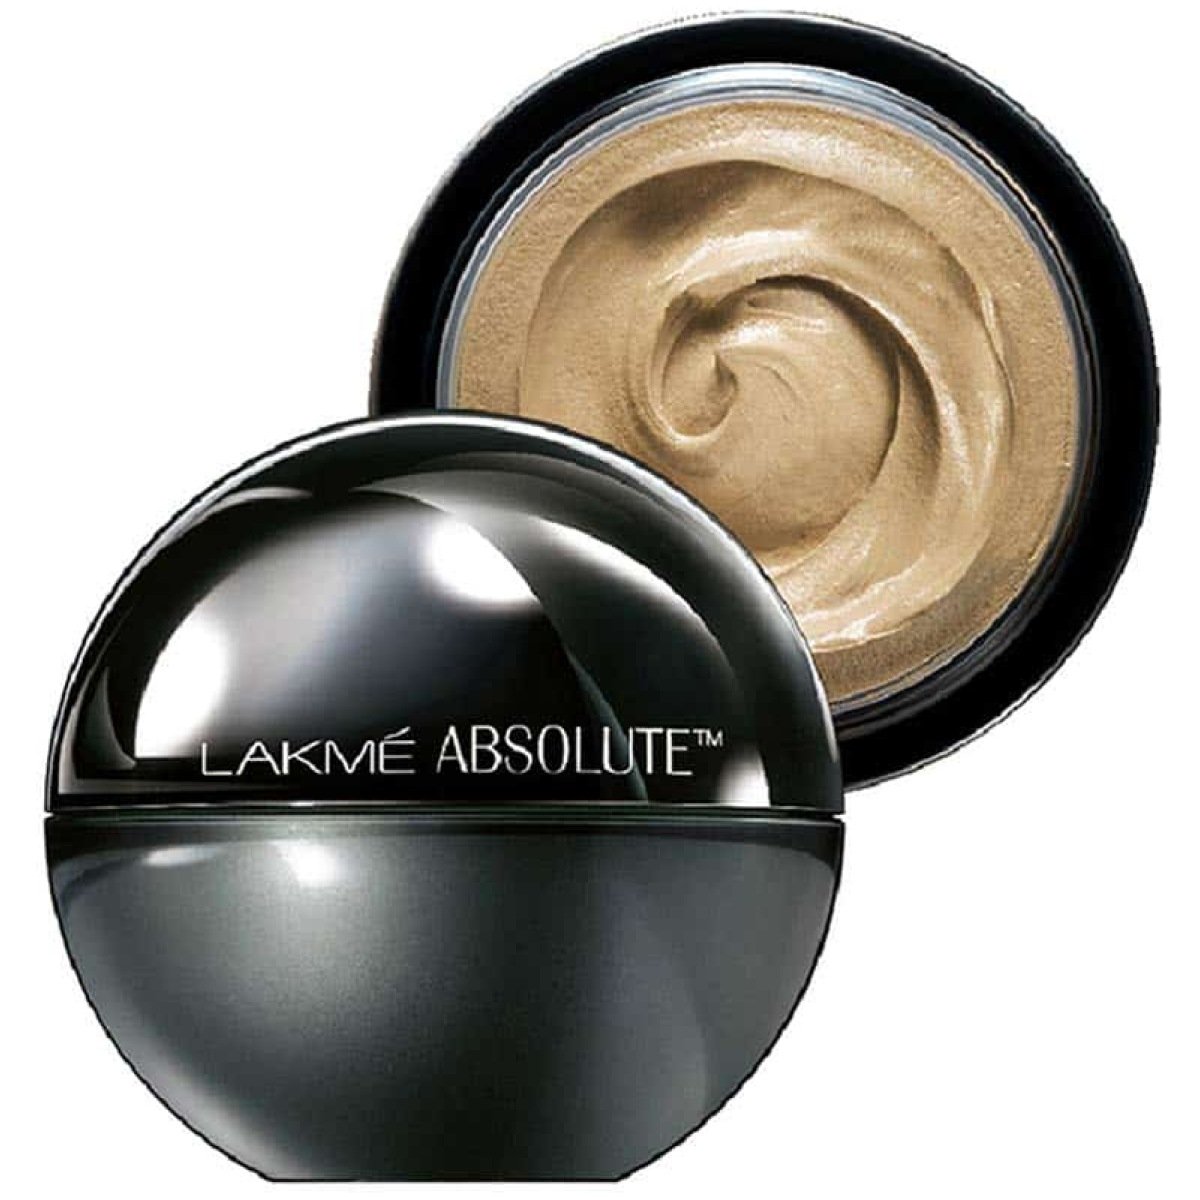 Lakme Absolute Skin Natural Mousse Mattreal 01 Ivory Fair 25g